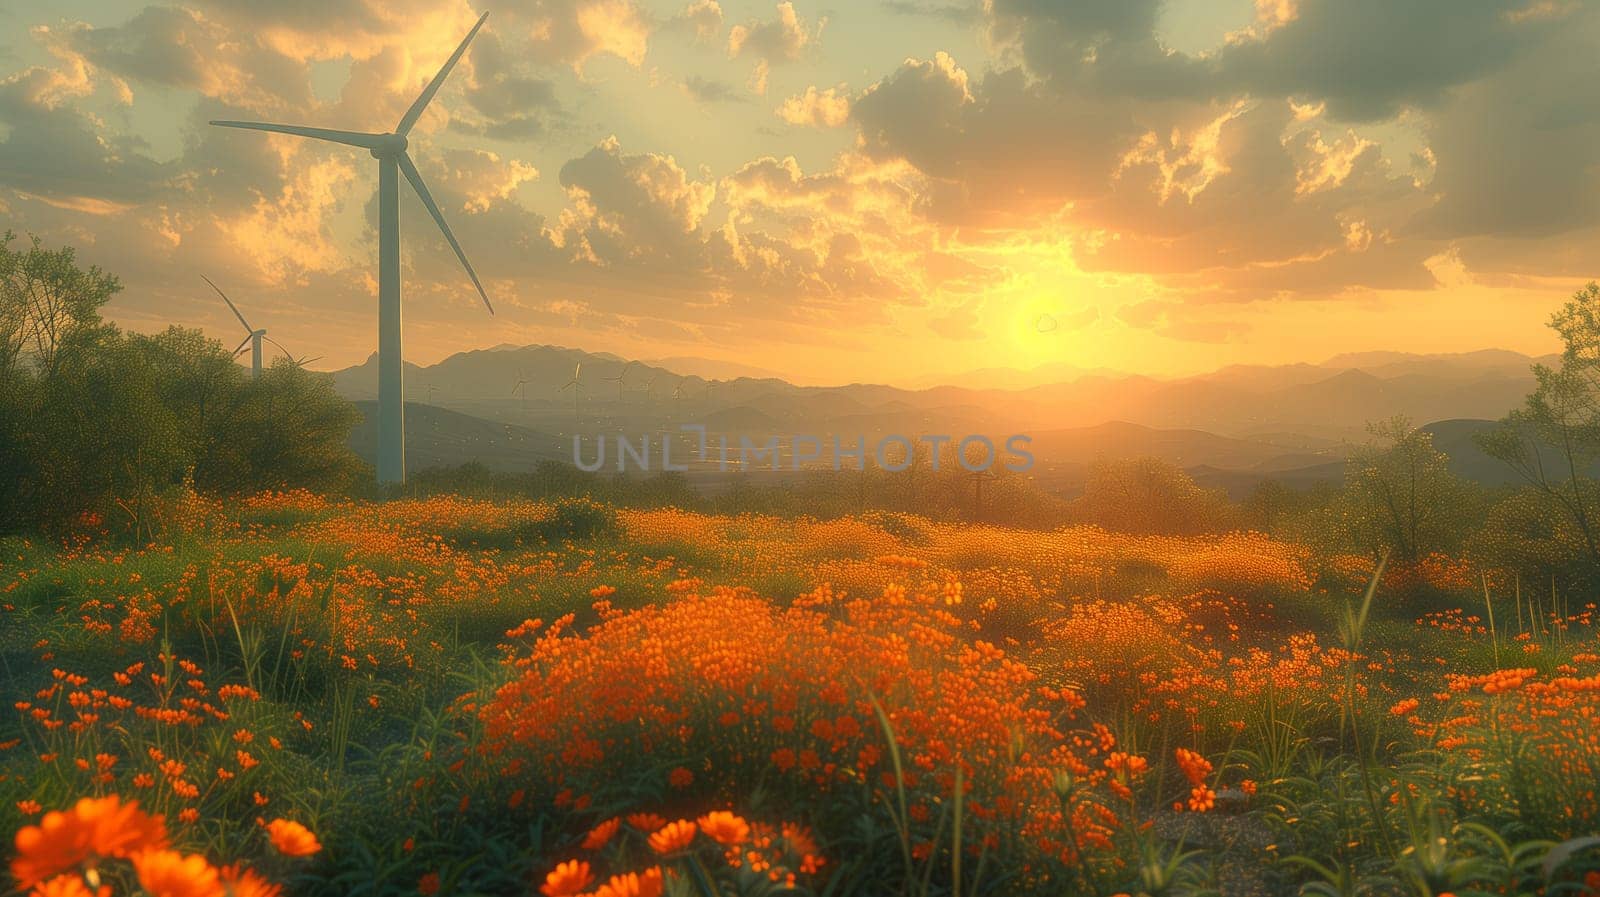 A natural landscape of flowers with a wind turbine under a sunset sky by richwolf